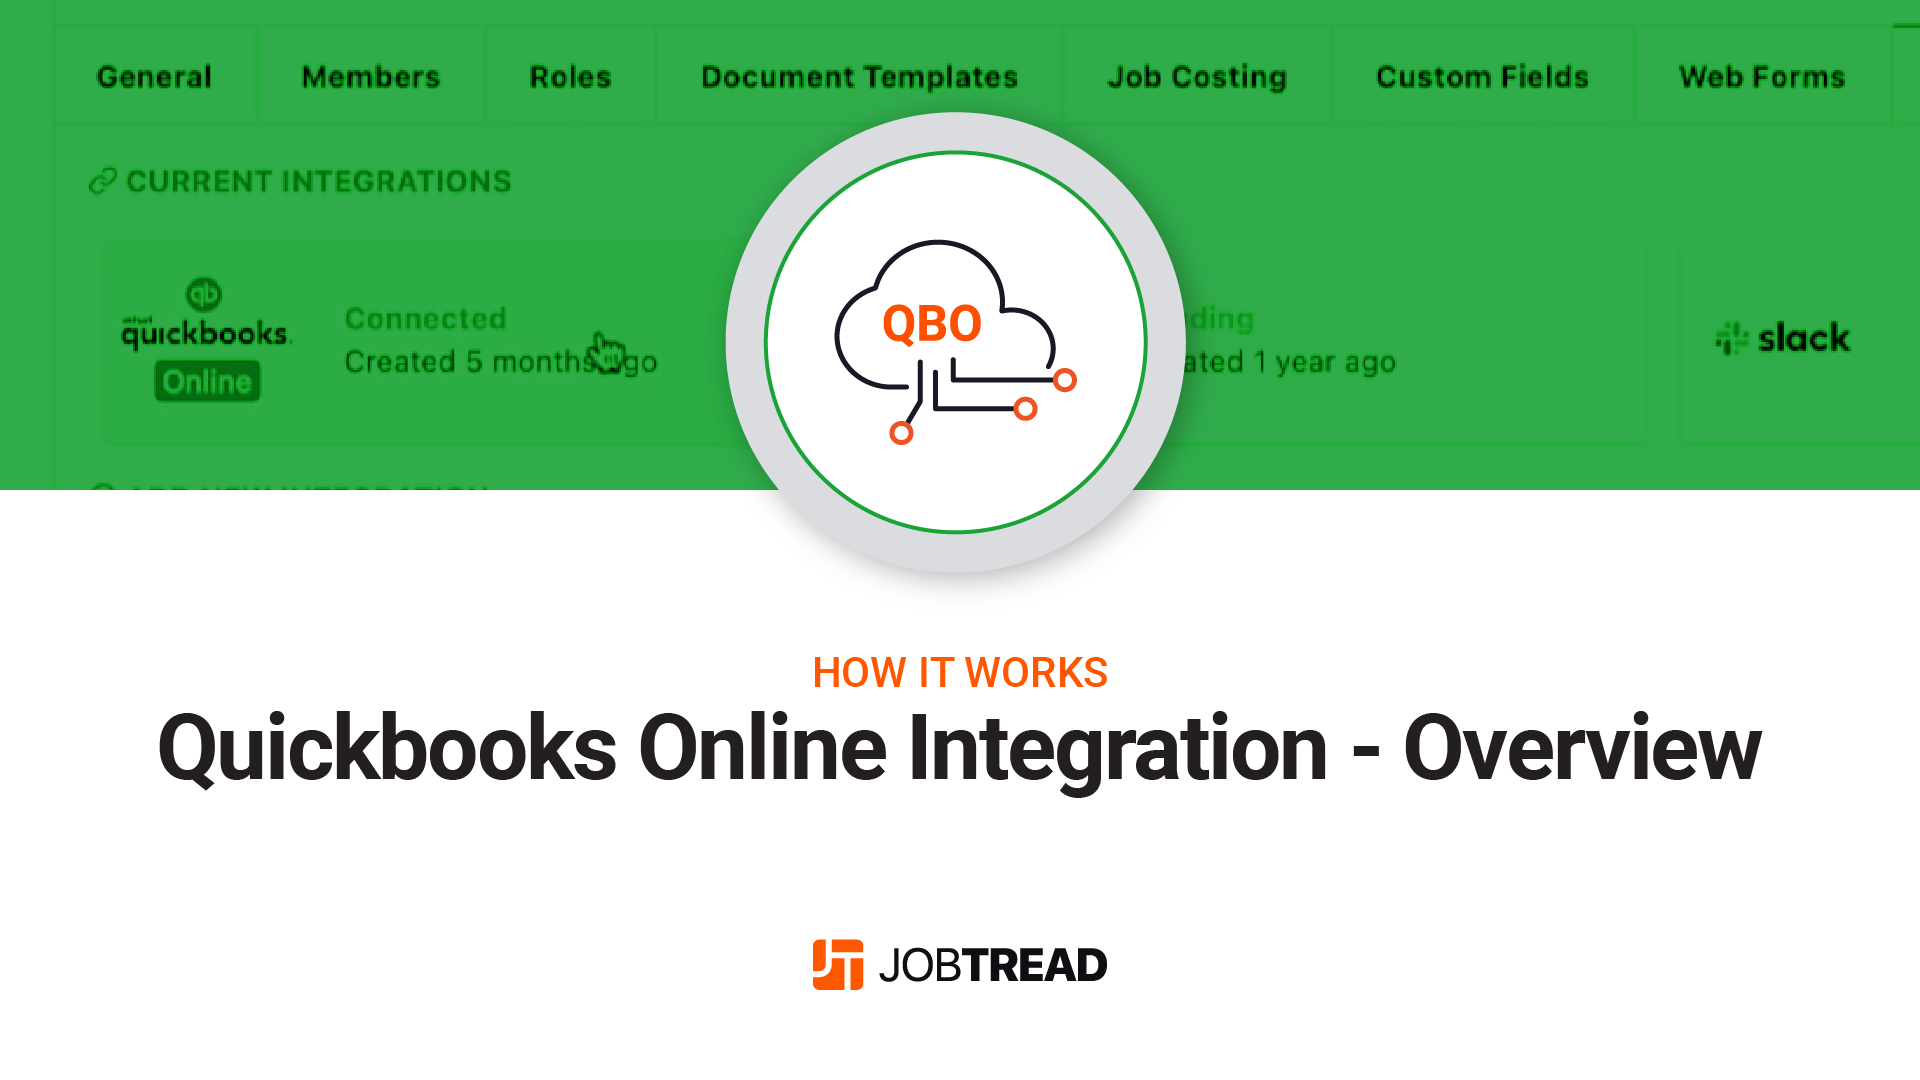 QuickBooks Online Integration Now Available